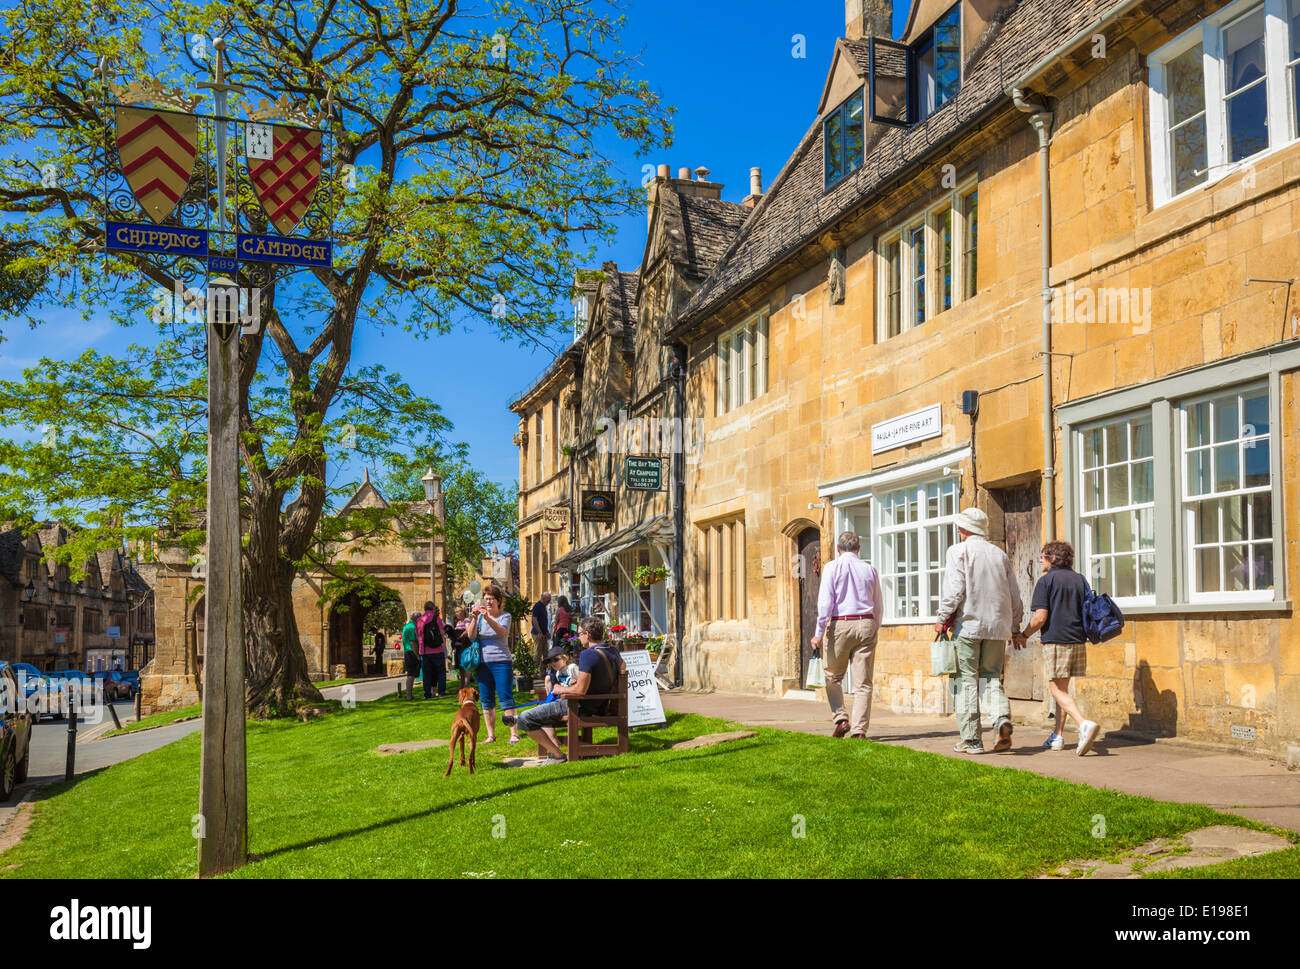 Chipping Campden High Street, Chipping Campden, The Cotswolds Gloucestershire Angleterre GB Europe Banque D'Images